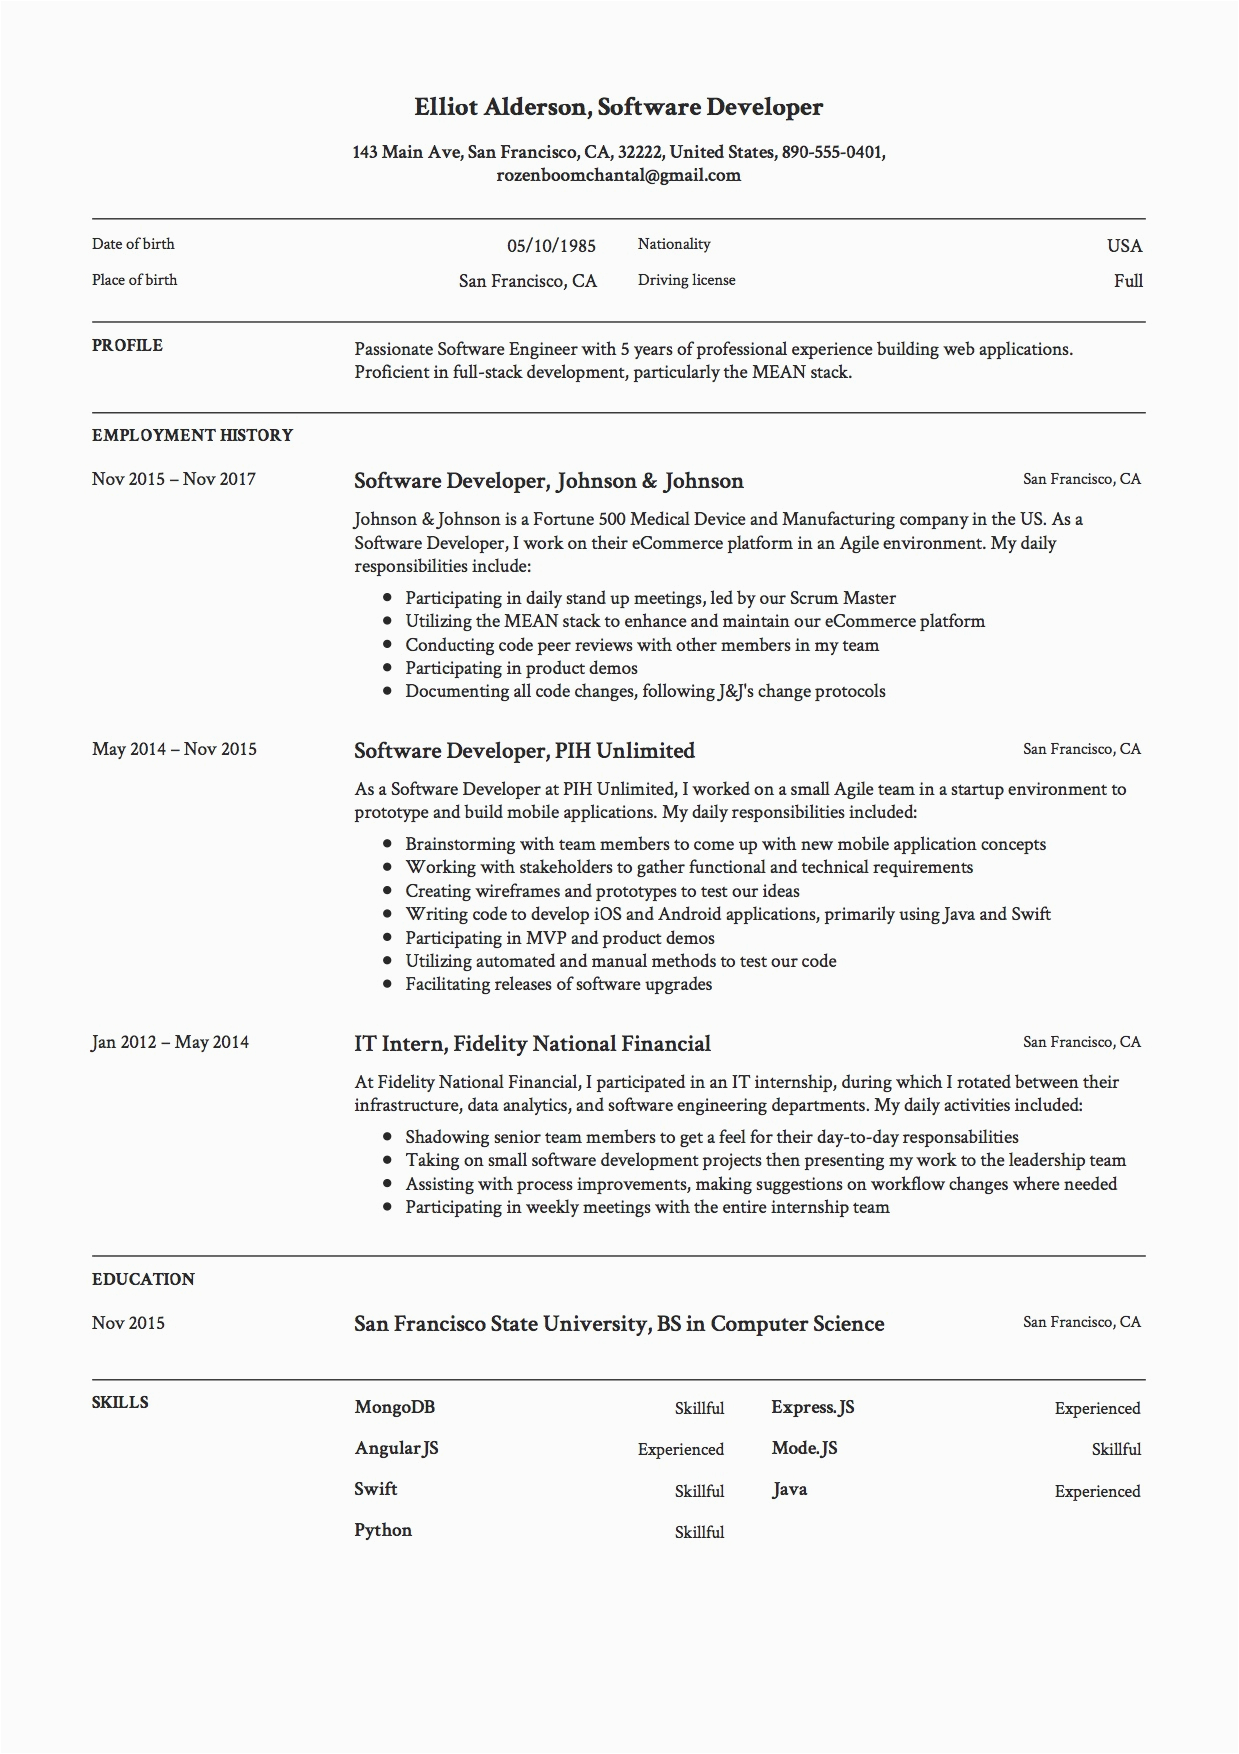 Sample Resume for 2 Years Experience software Developer Sap Pp Resume for 2 Years Experience to whom It May